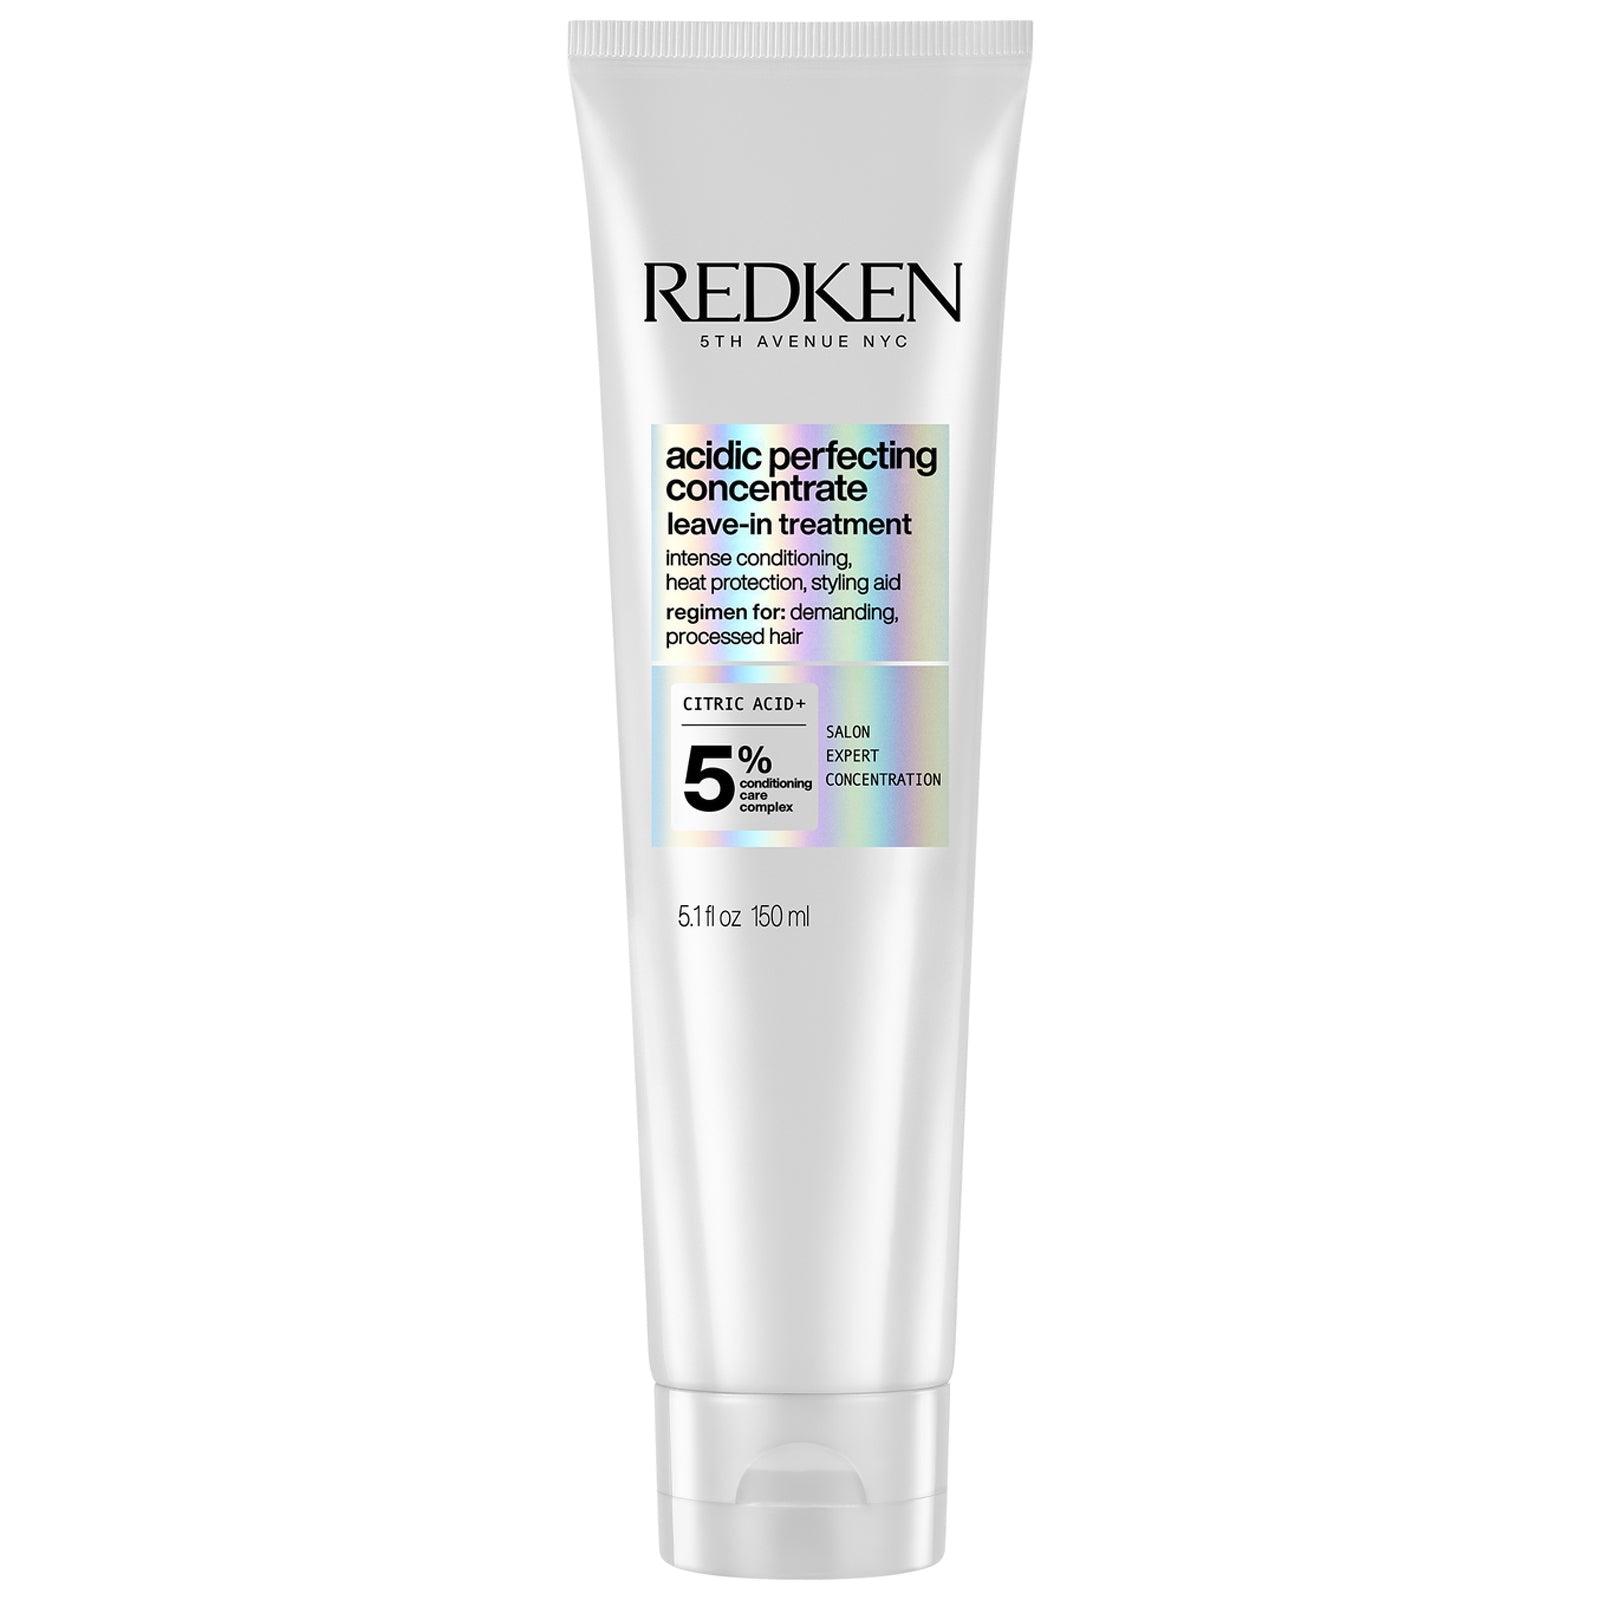 Redken Acidic Perfecting Concentrate Leave In Conditioner